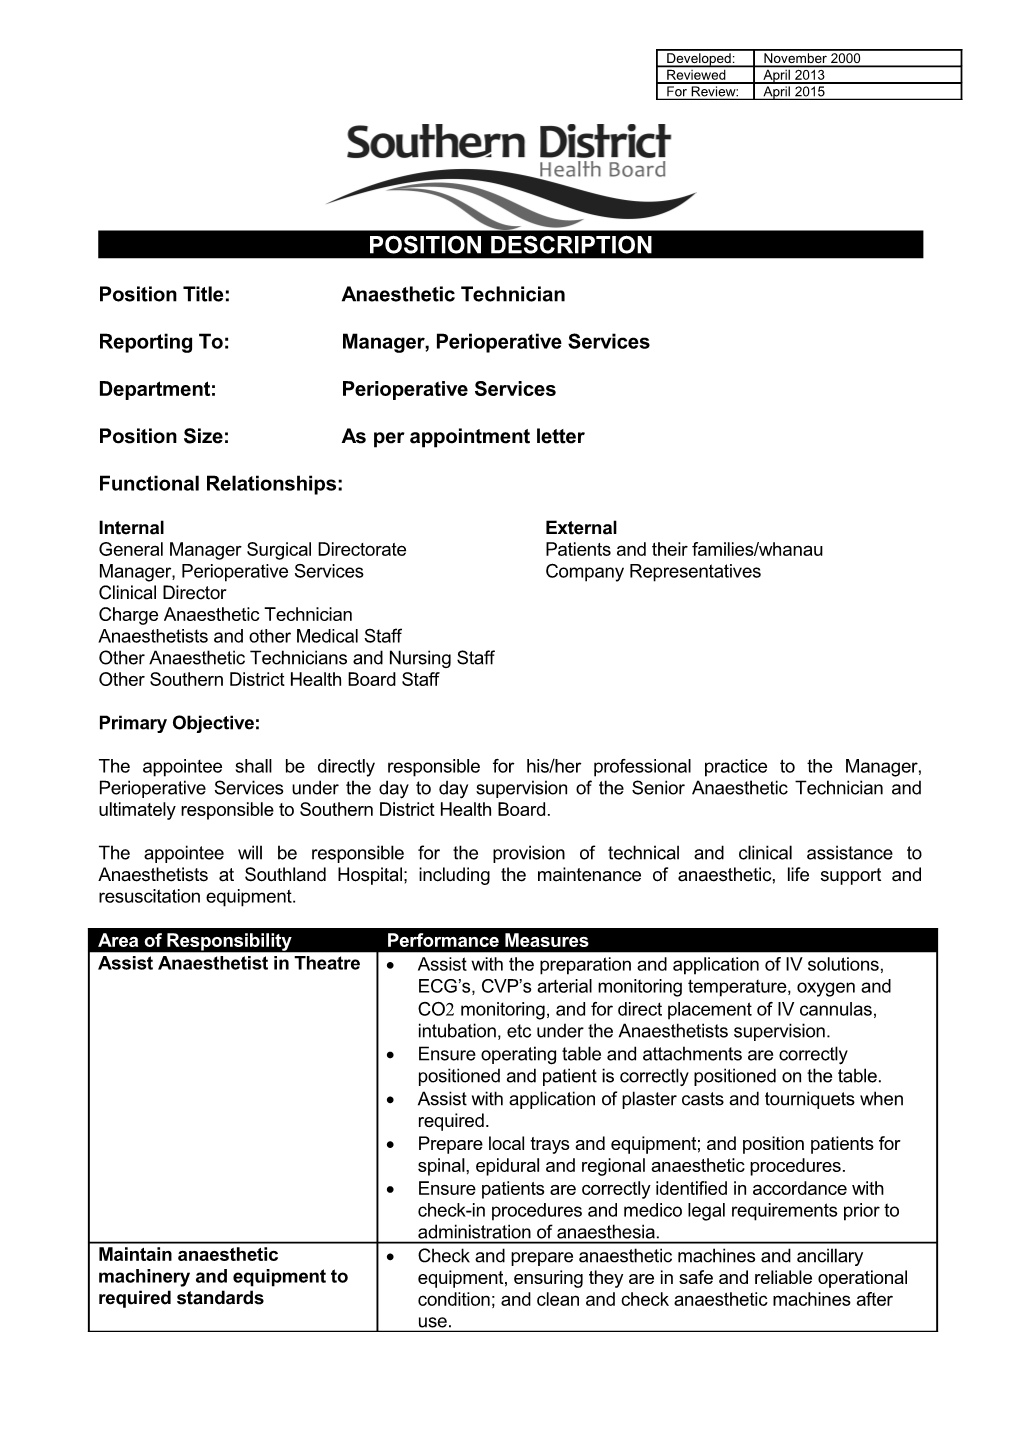 Anaesthetic Technician - Page 1